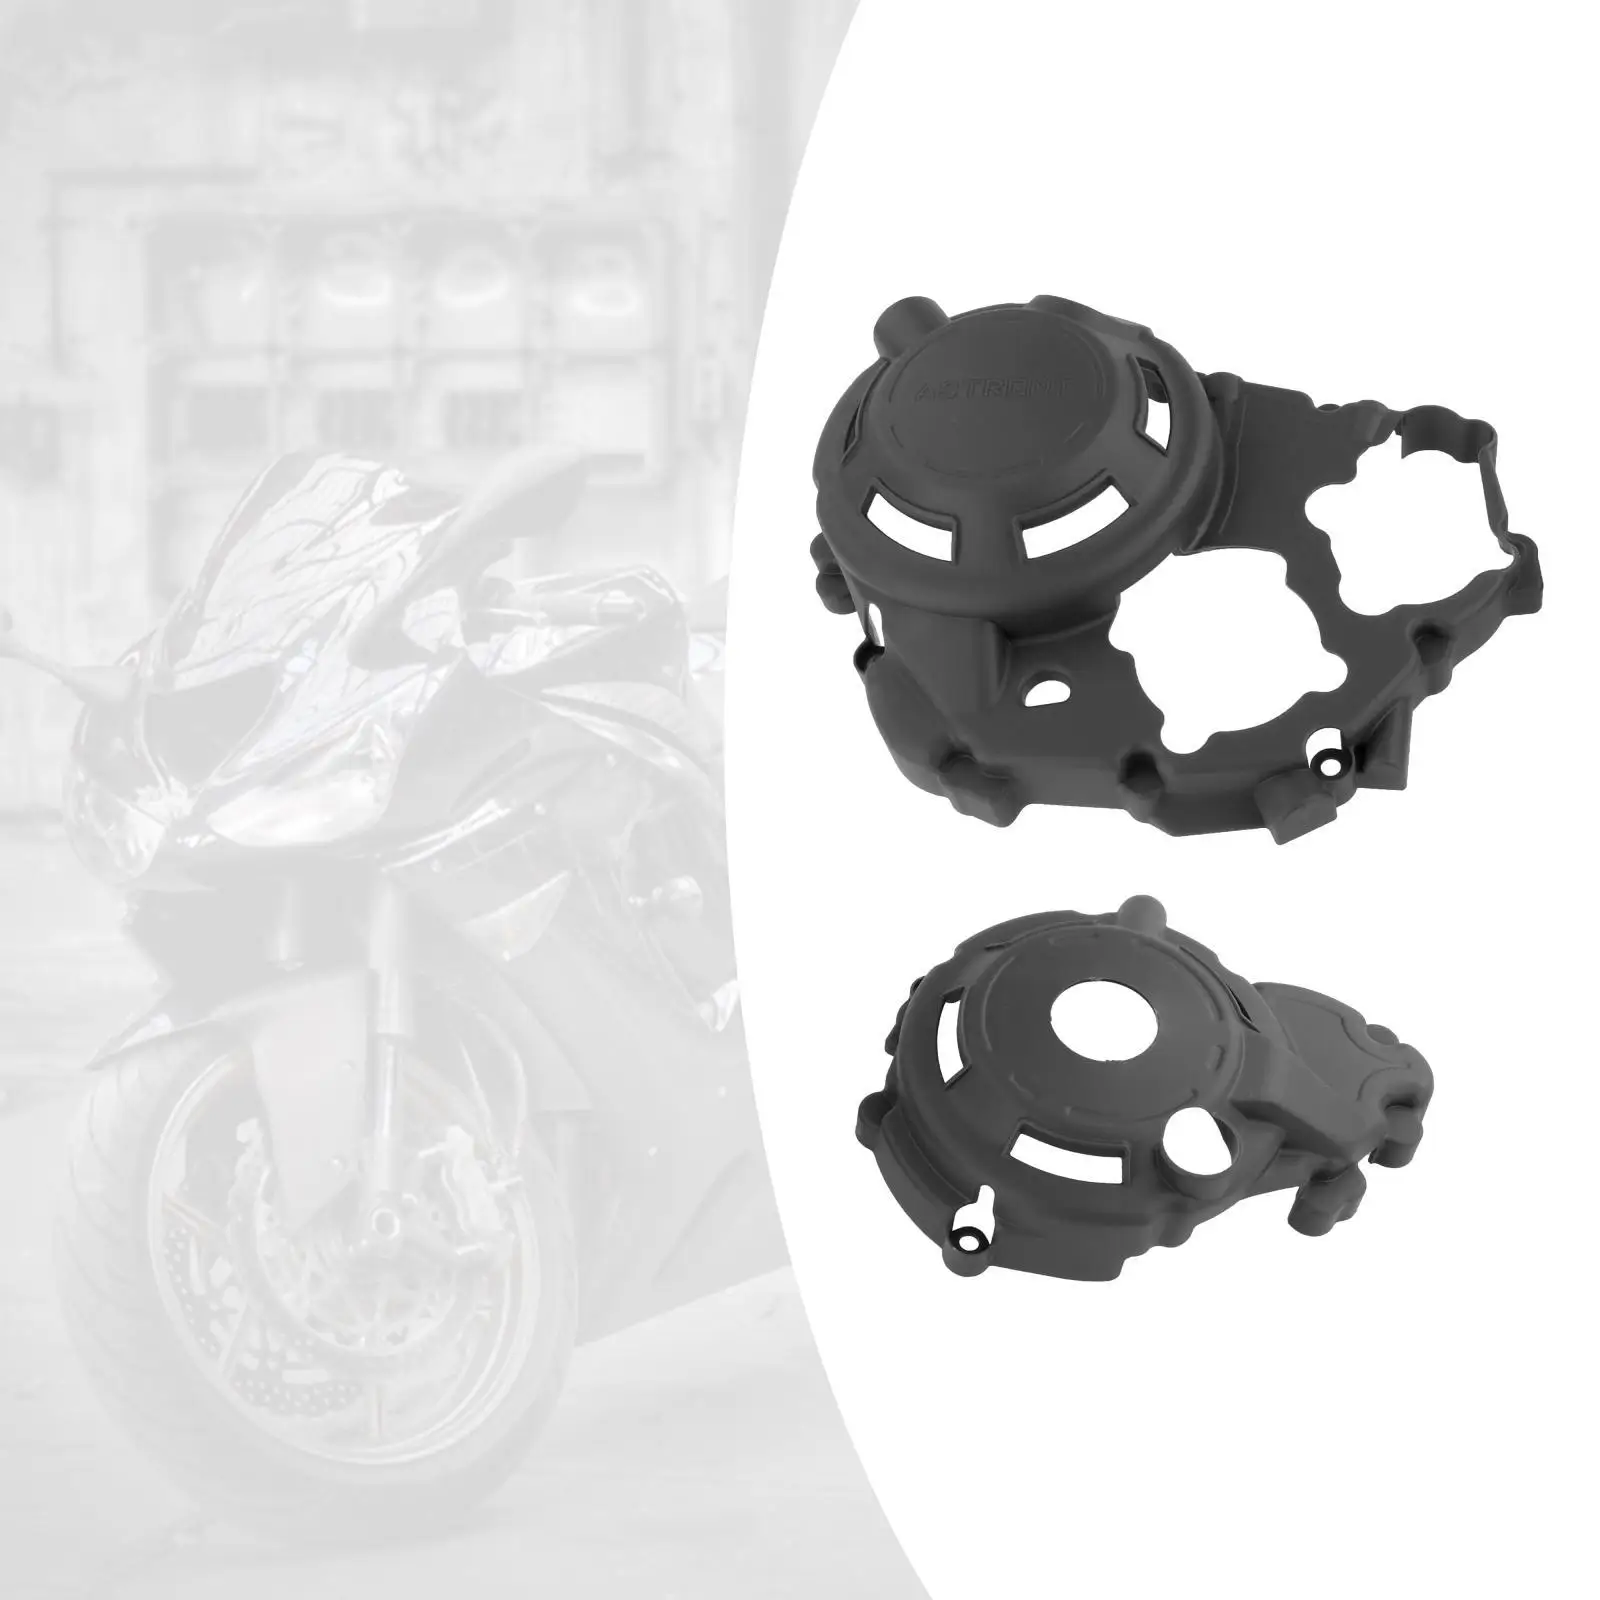 Motorcycle Engine Protector Cover Easy to Install Guard Case for Honda Crf250L 300L